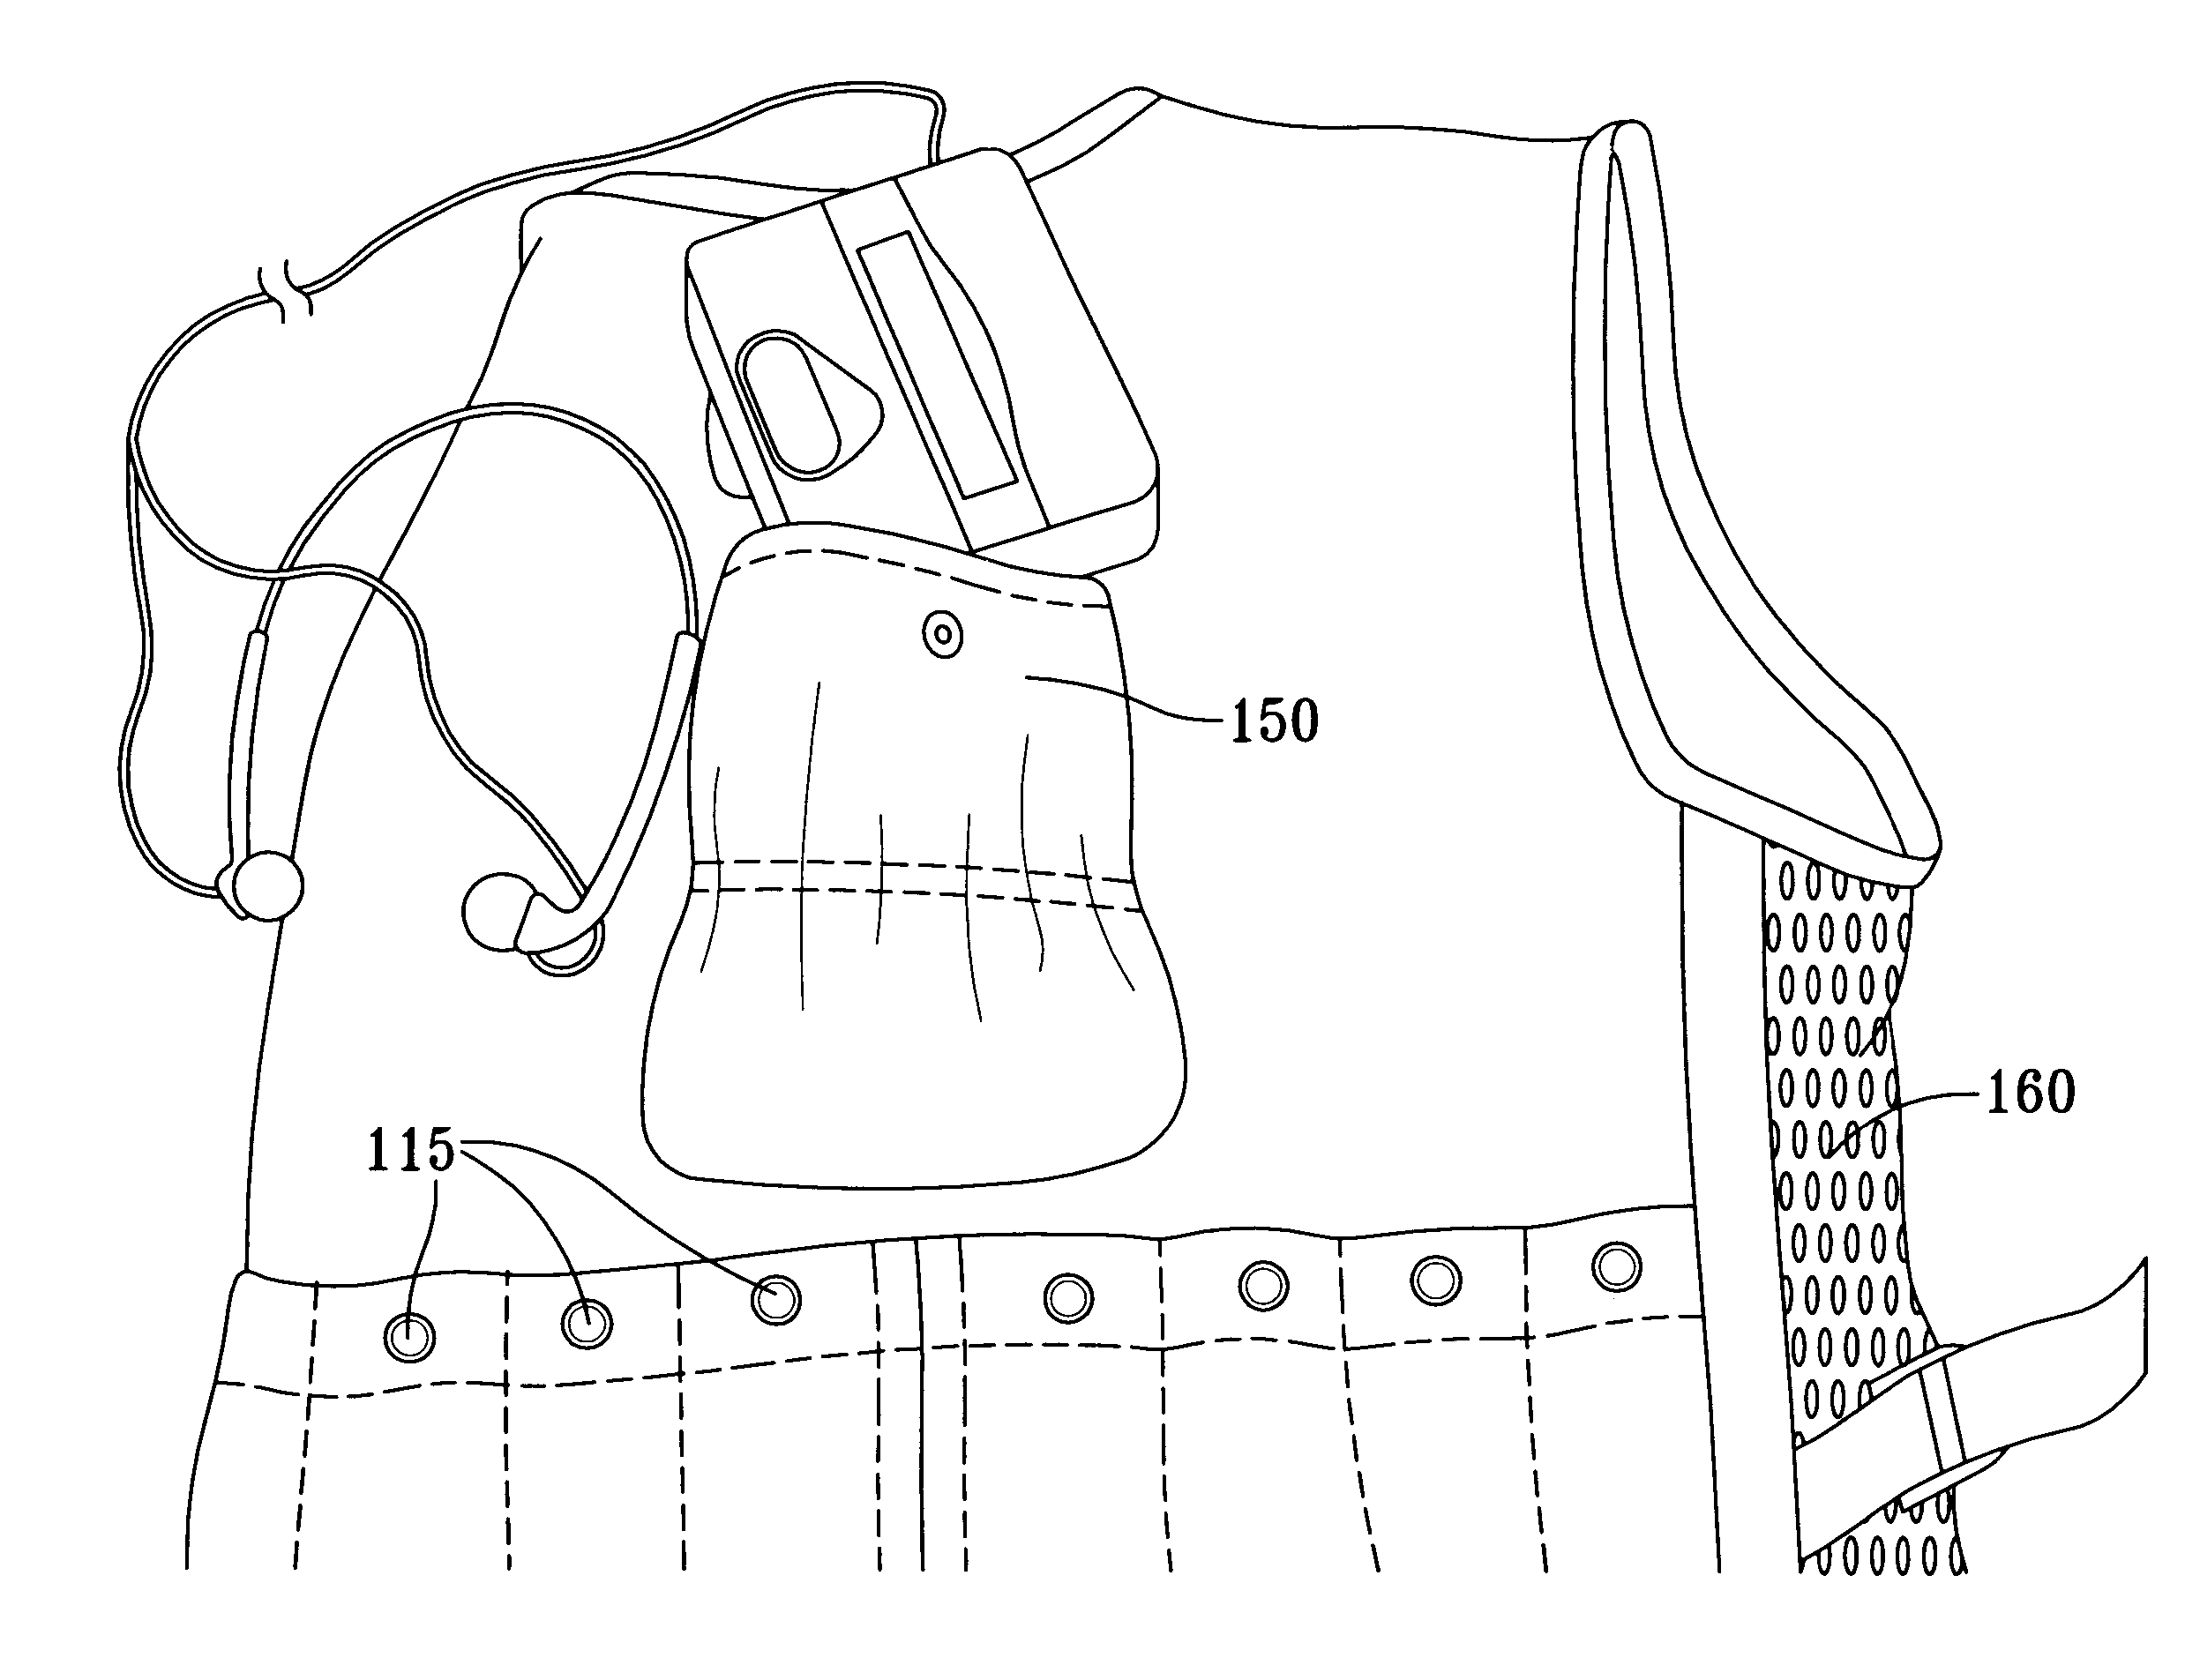 Method of wearing weighted training vest while listening to audio equipment